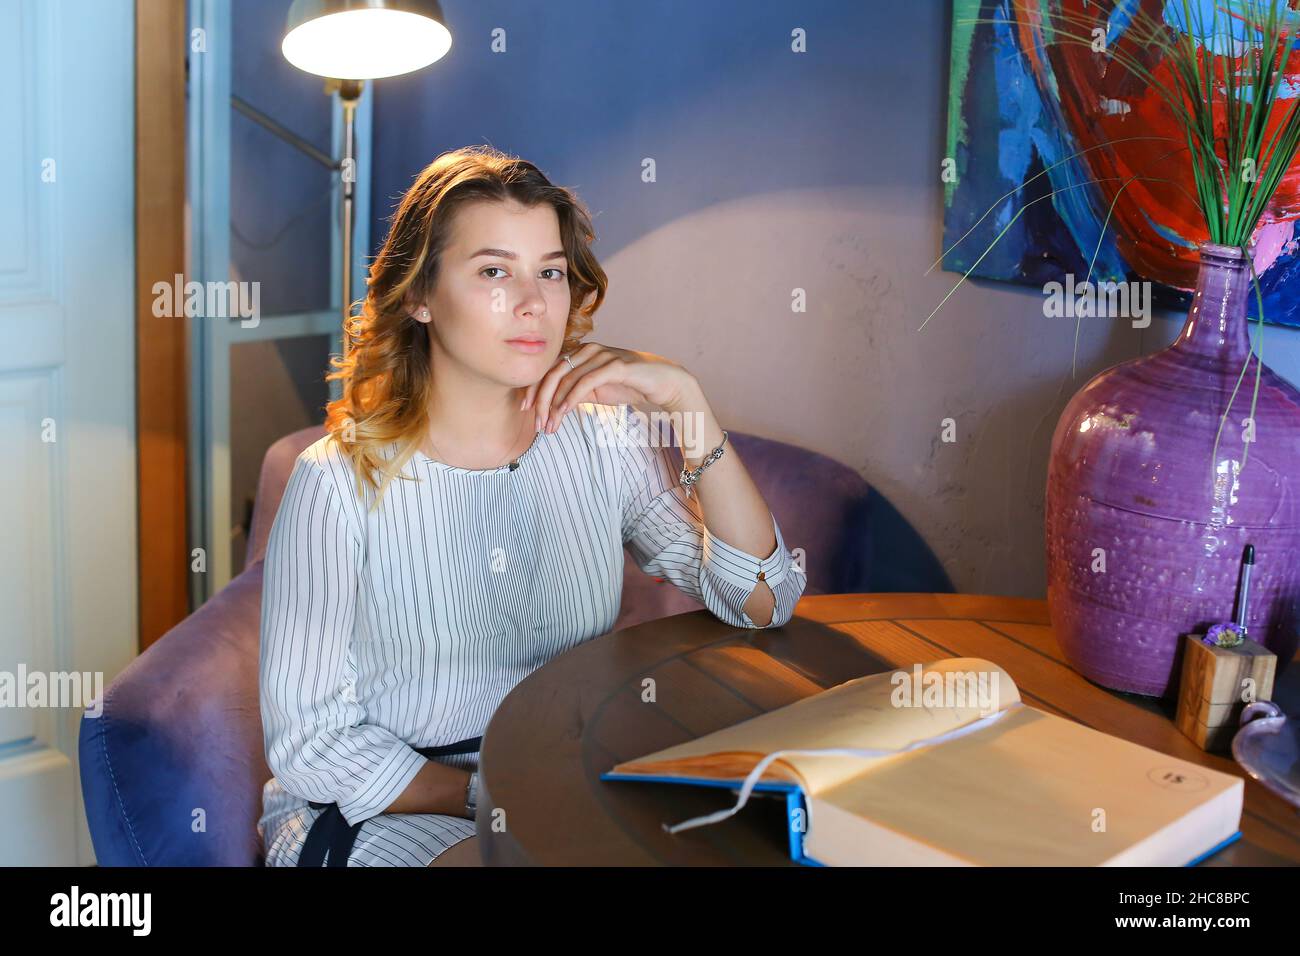 Attractive young confident girl looks at camera, holds hand near face and sits in purple chair on background of lighted lamp and blue walls with Stock Photo